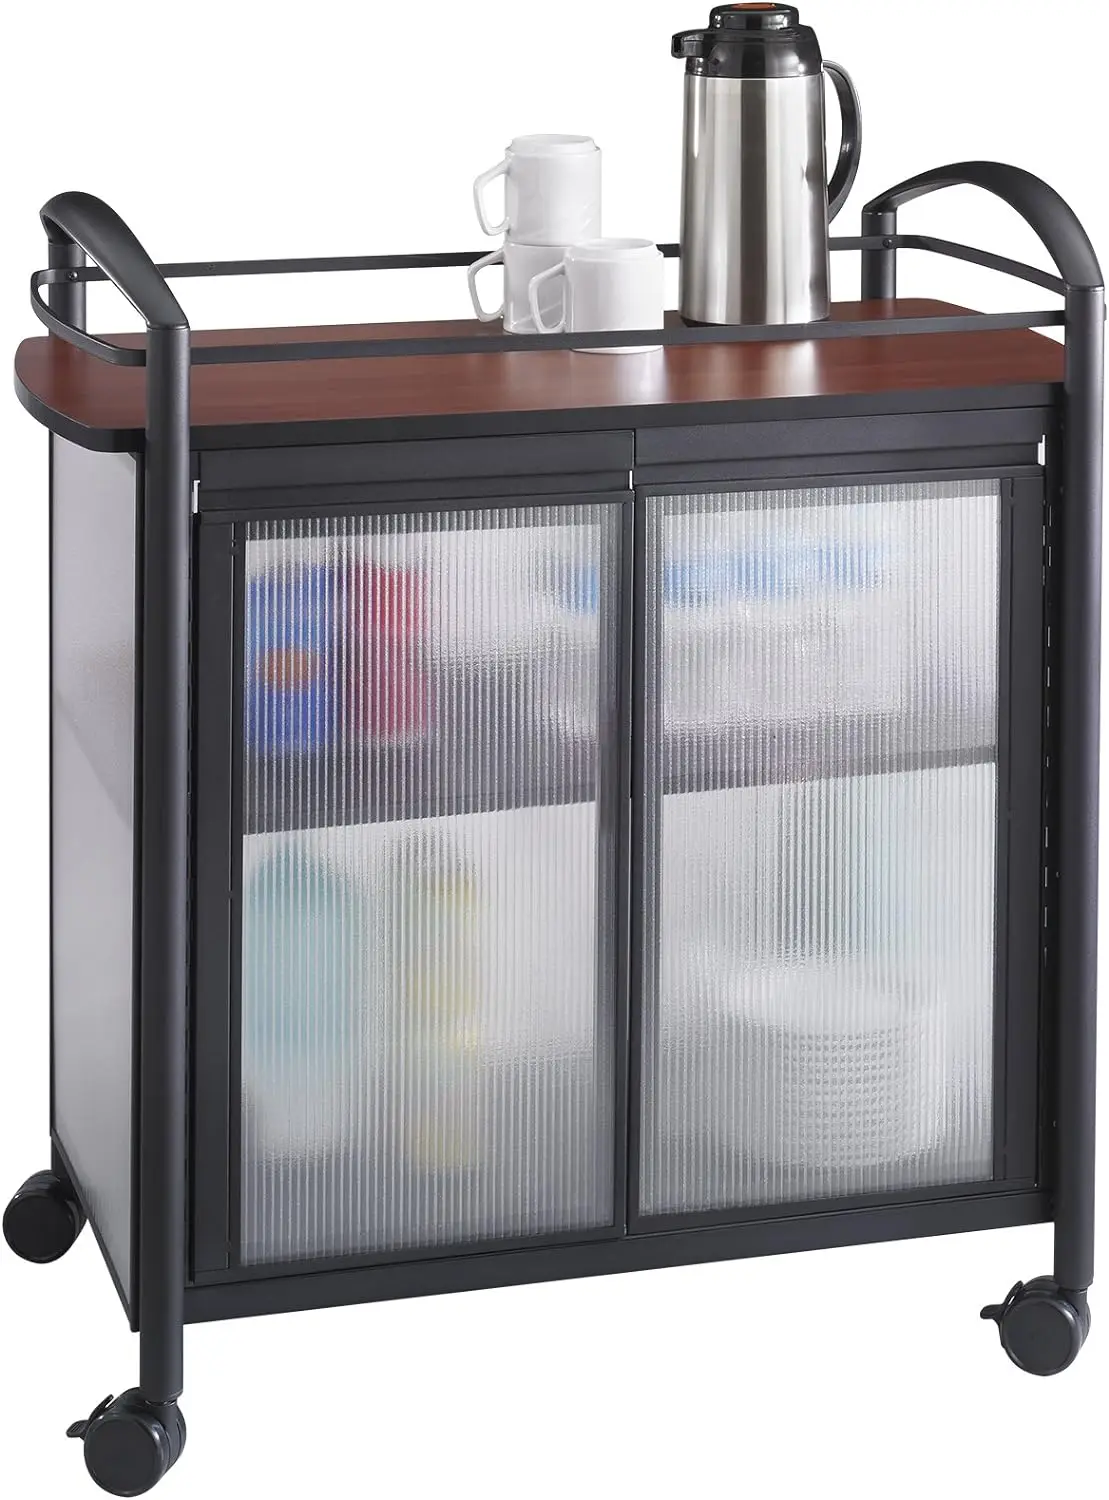 

Safco Products Impromptu Refreshment Cart 8966BL, Cherry Top, Black Frame, 200 lbs. Capacity, Double Doors, Swivel Wheels